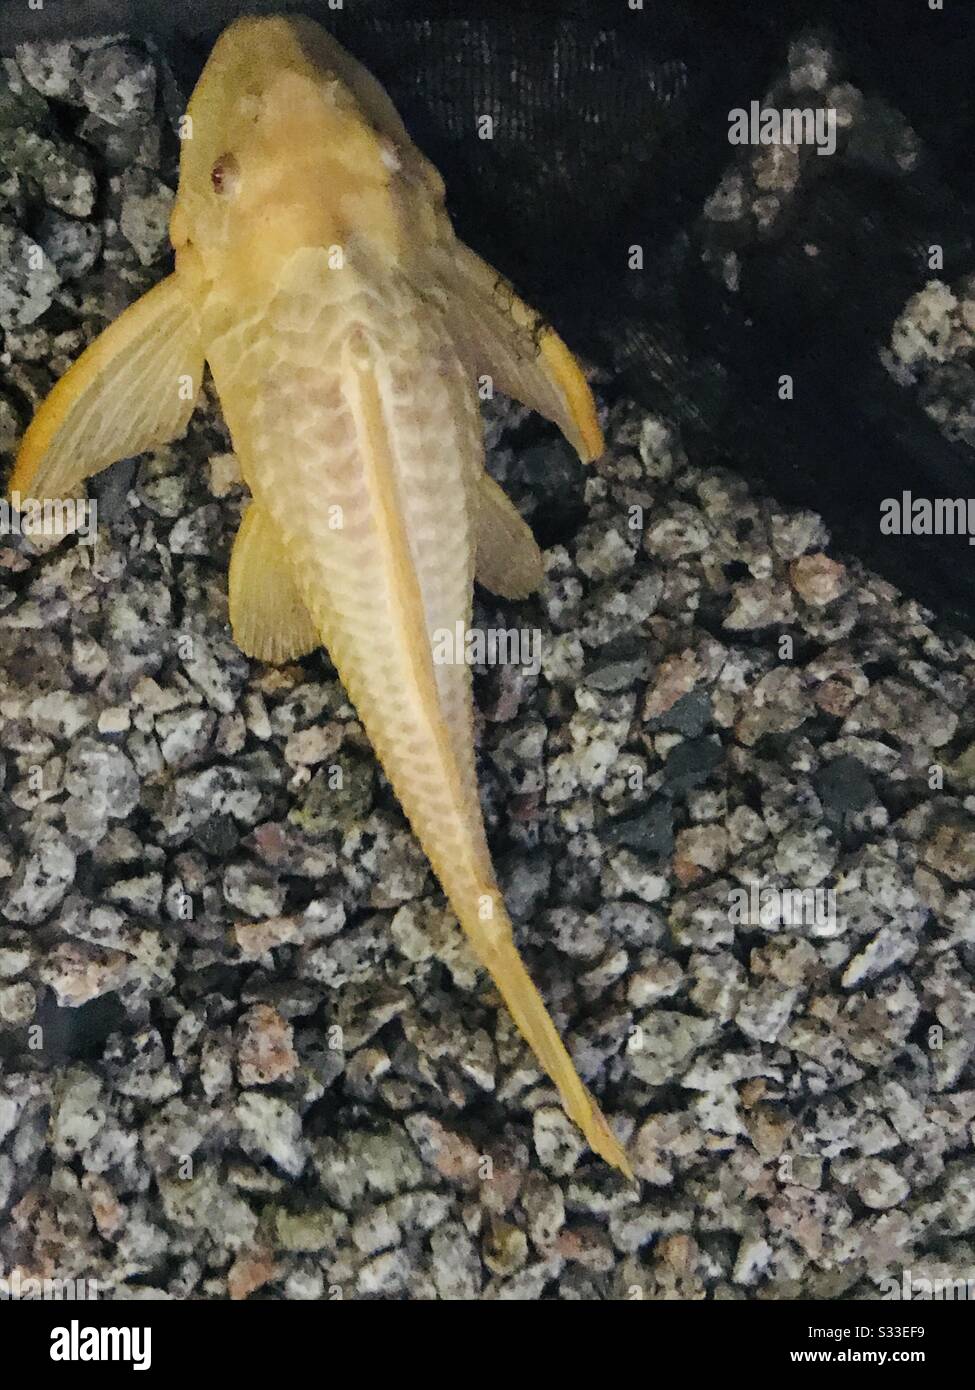 Golden Bristlenose Pleco sucker fish in a great aquarium in an educational institution - yellow fish cornered by itself - clear water -algae-eating, freshwater aquarium fish with disk-shaped mouths. Stock Photo